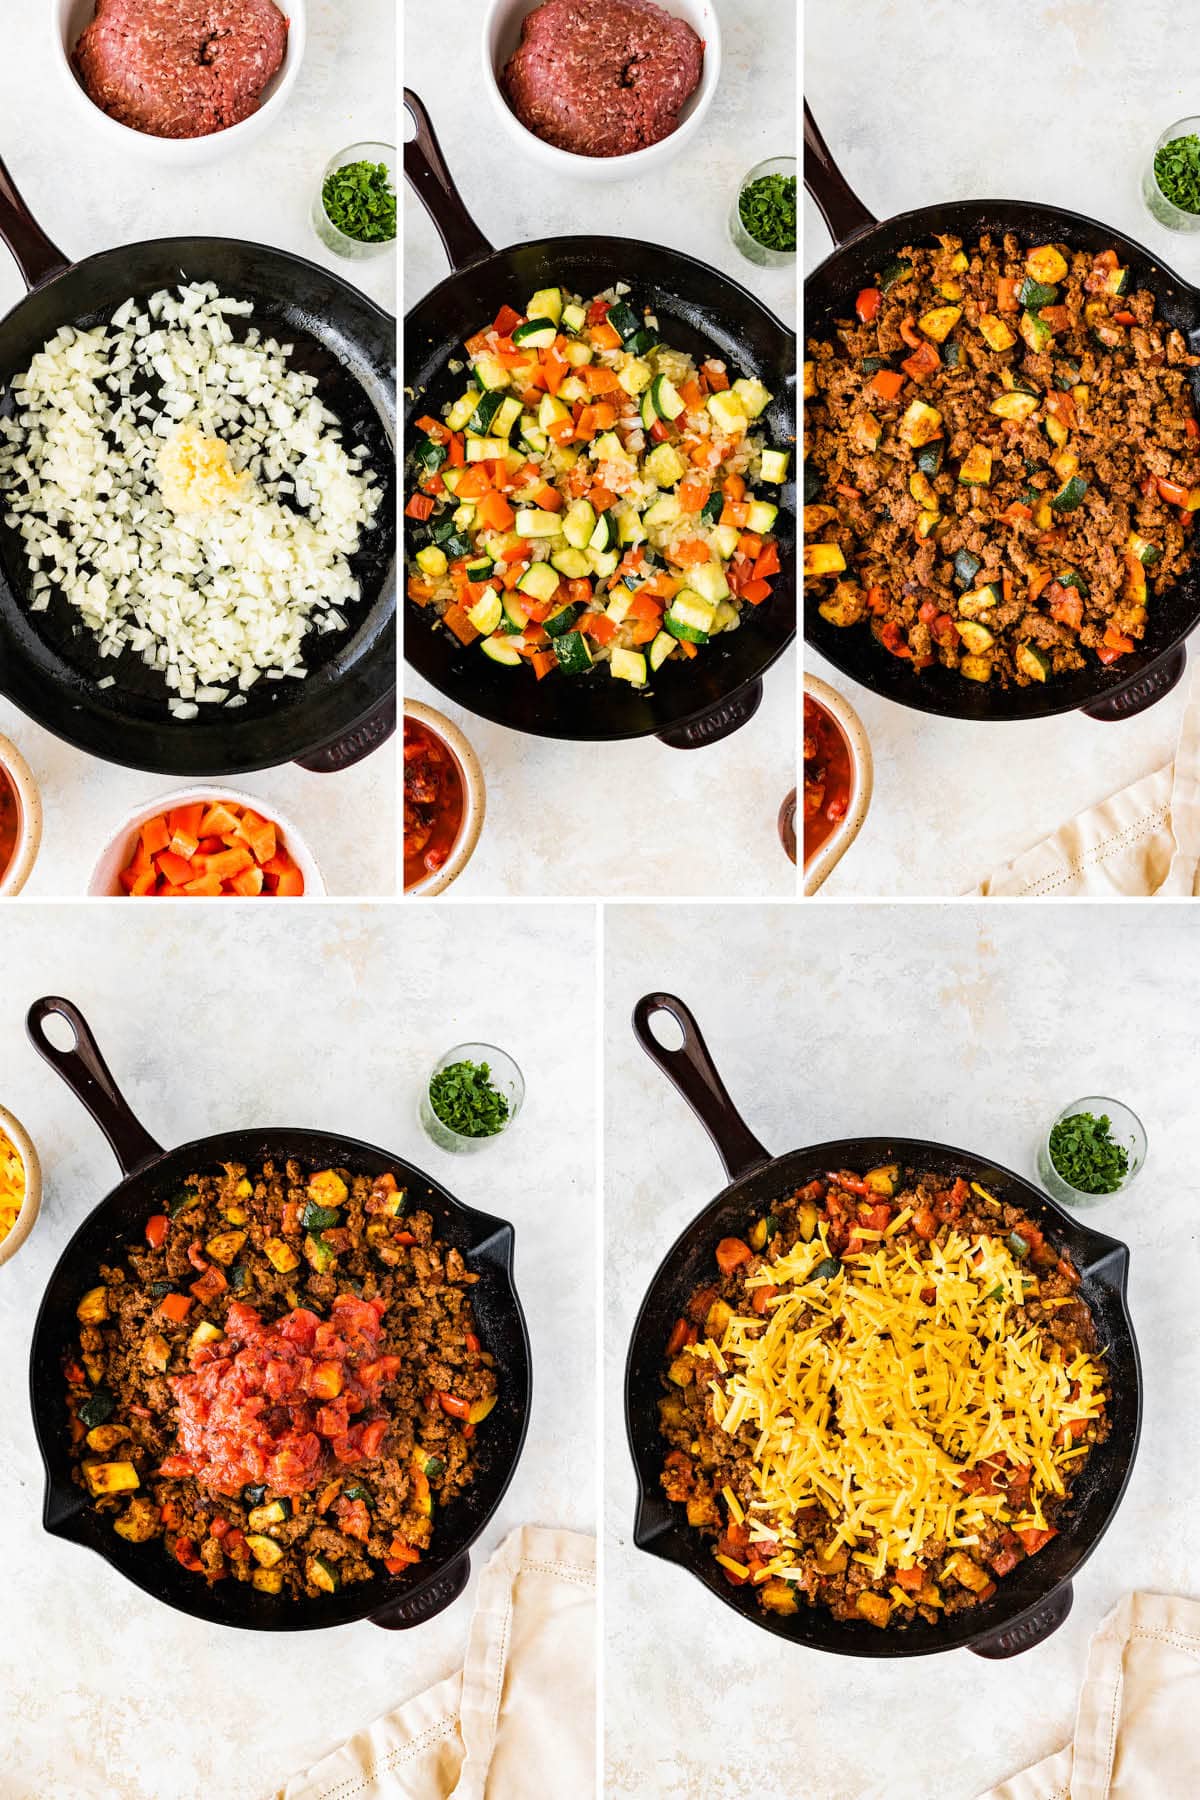 Five photos showing the steps to make a Ground Beef and Squash Skillet: sautéing veggies in a skillet, adding ground beef, tomatoes and cheddar on top.